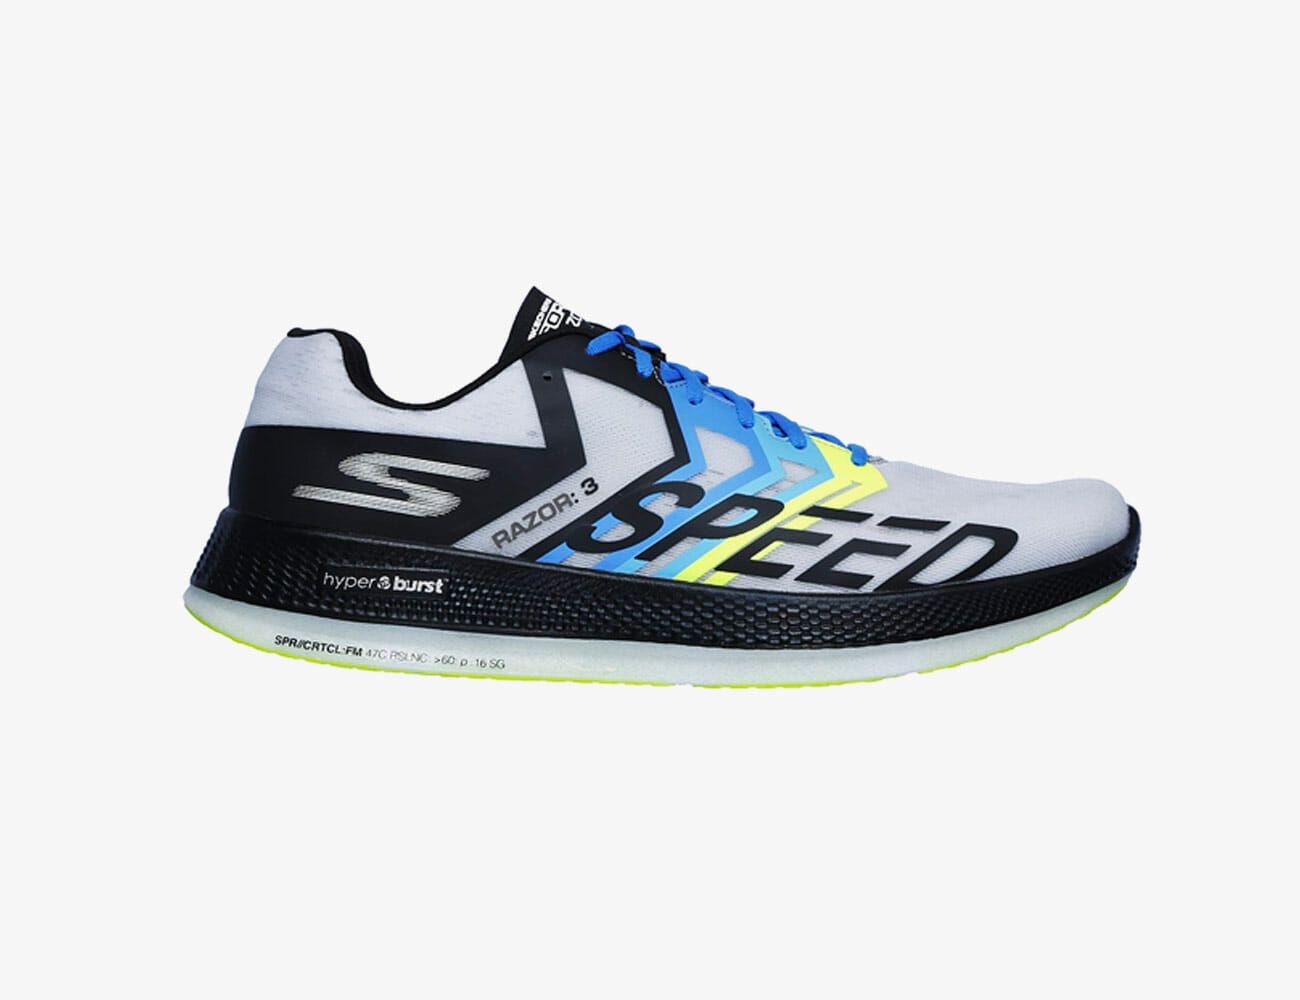 best running shoe with support